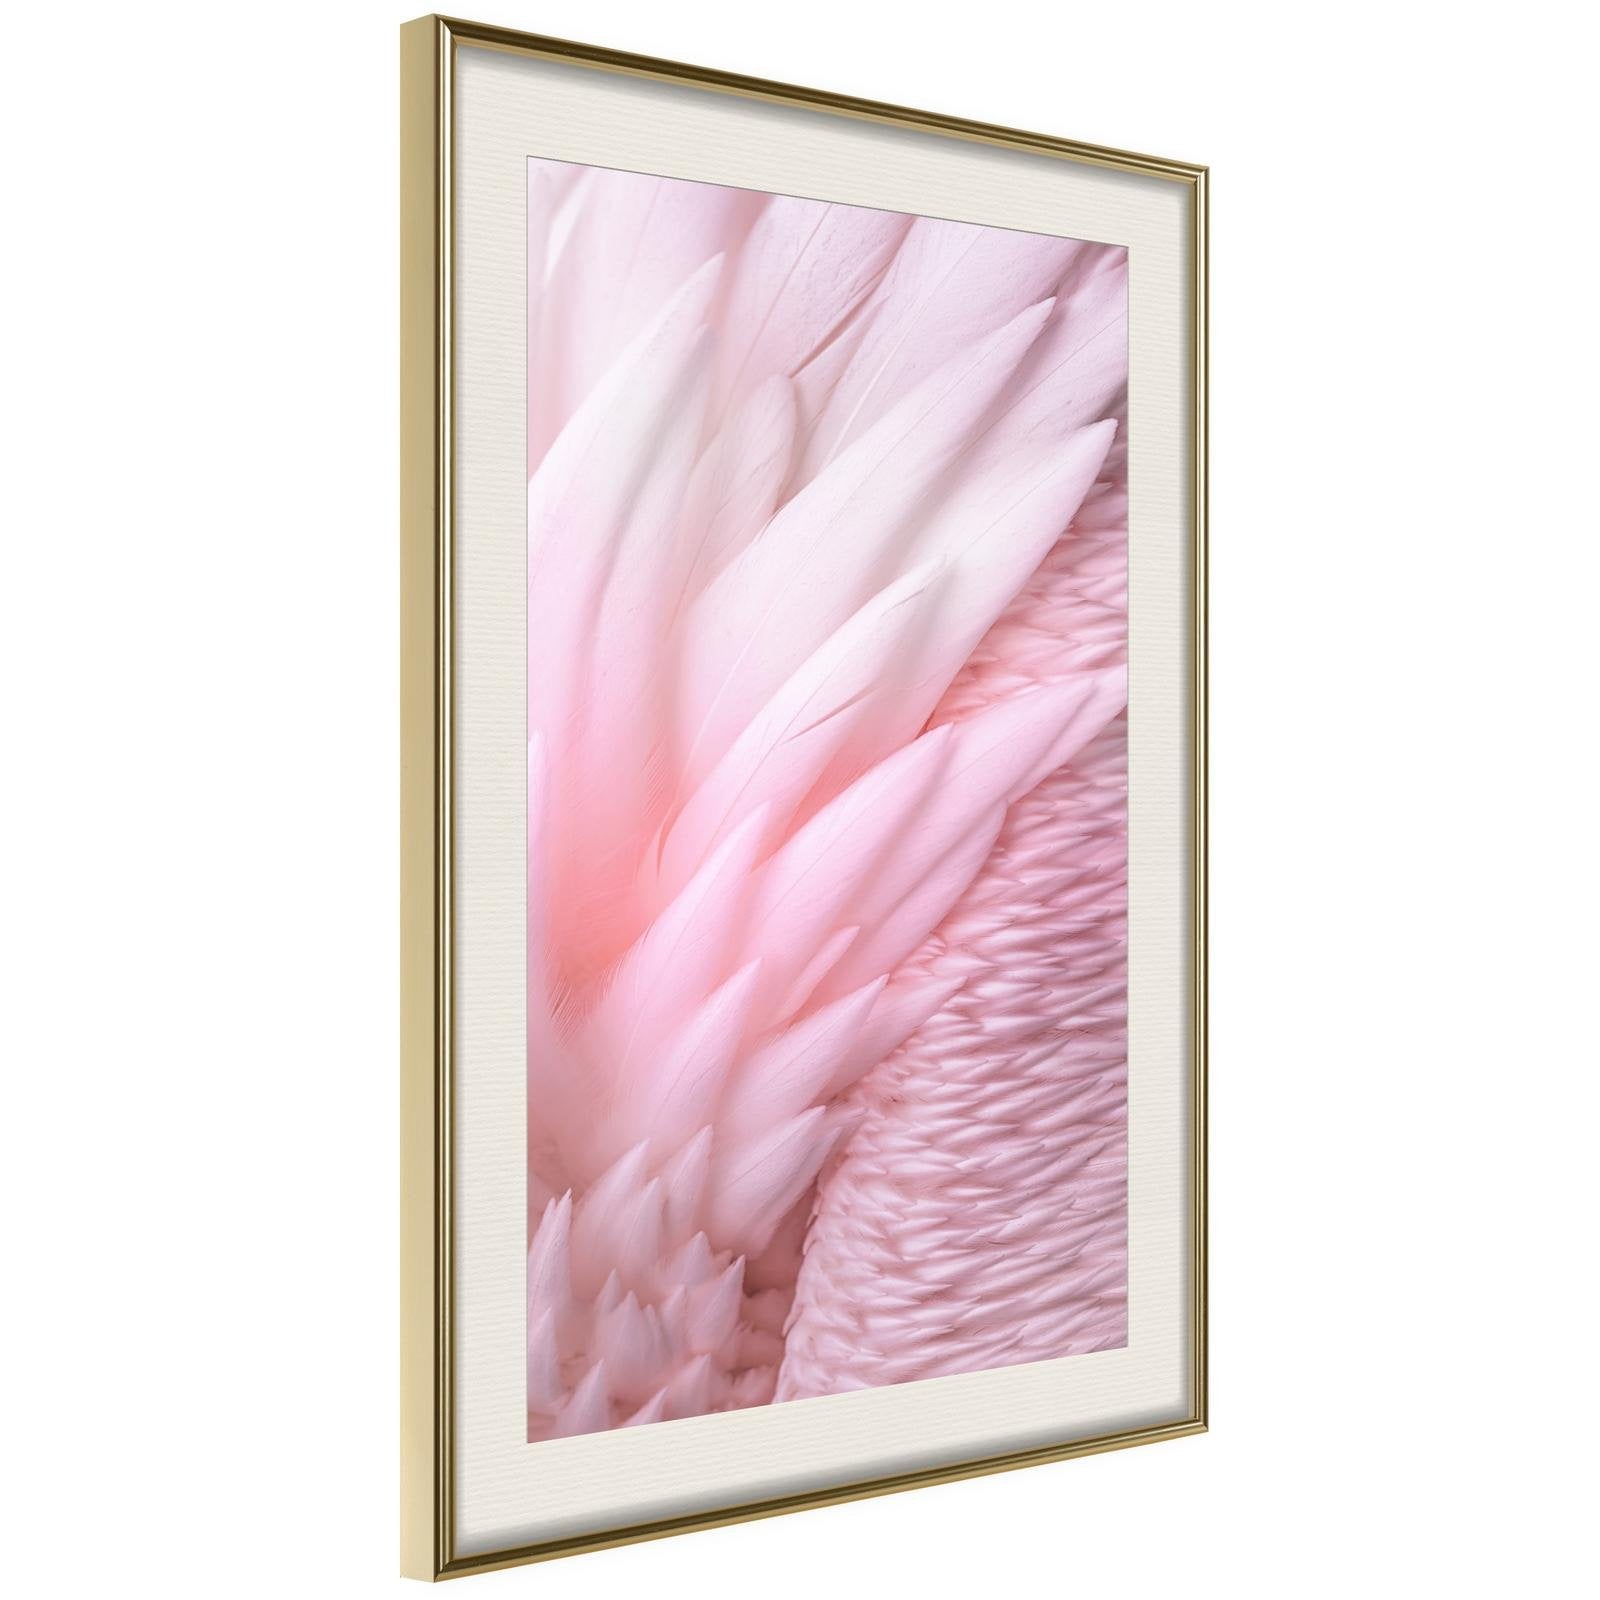 Inramad Poster / Tavla - Pink Feathers-Poster Inramad-Artgeist-20x30-Guldram med passepartout-peaceofhome.se